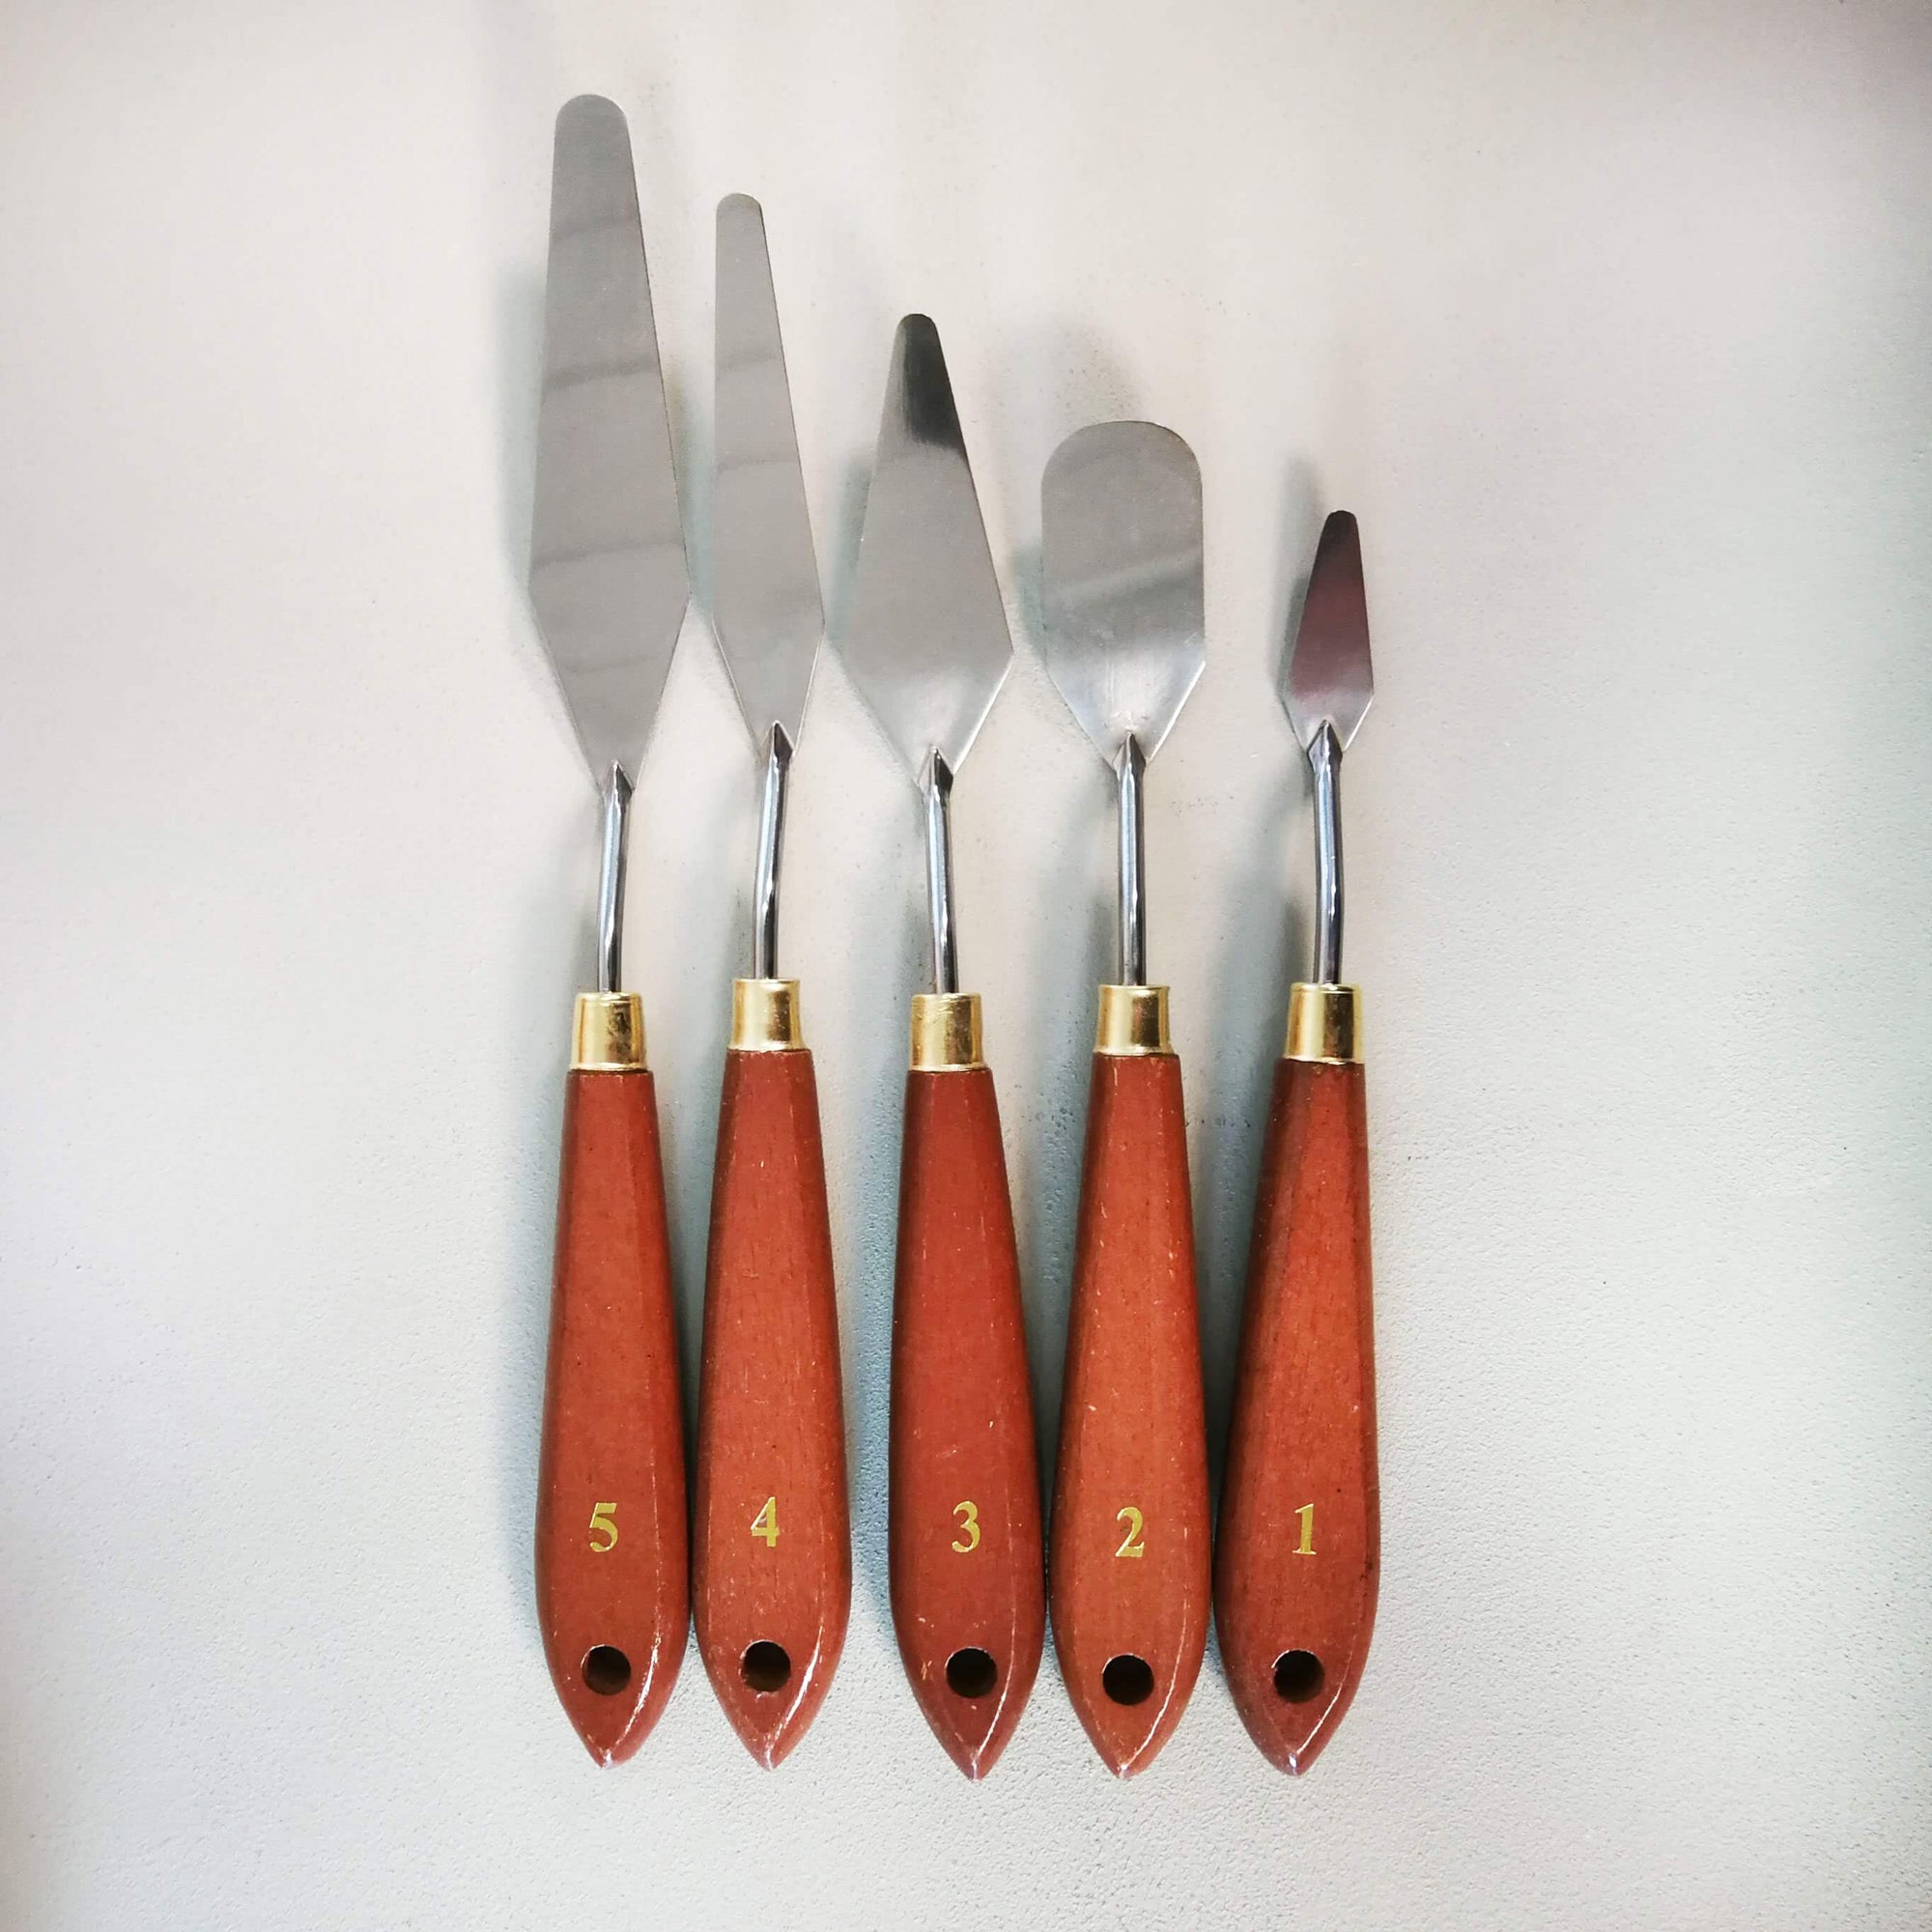 ARTessentials Palette Knife Set for Oils and Acrylics - 5 Piece